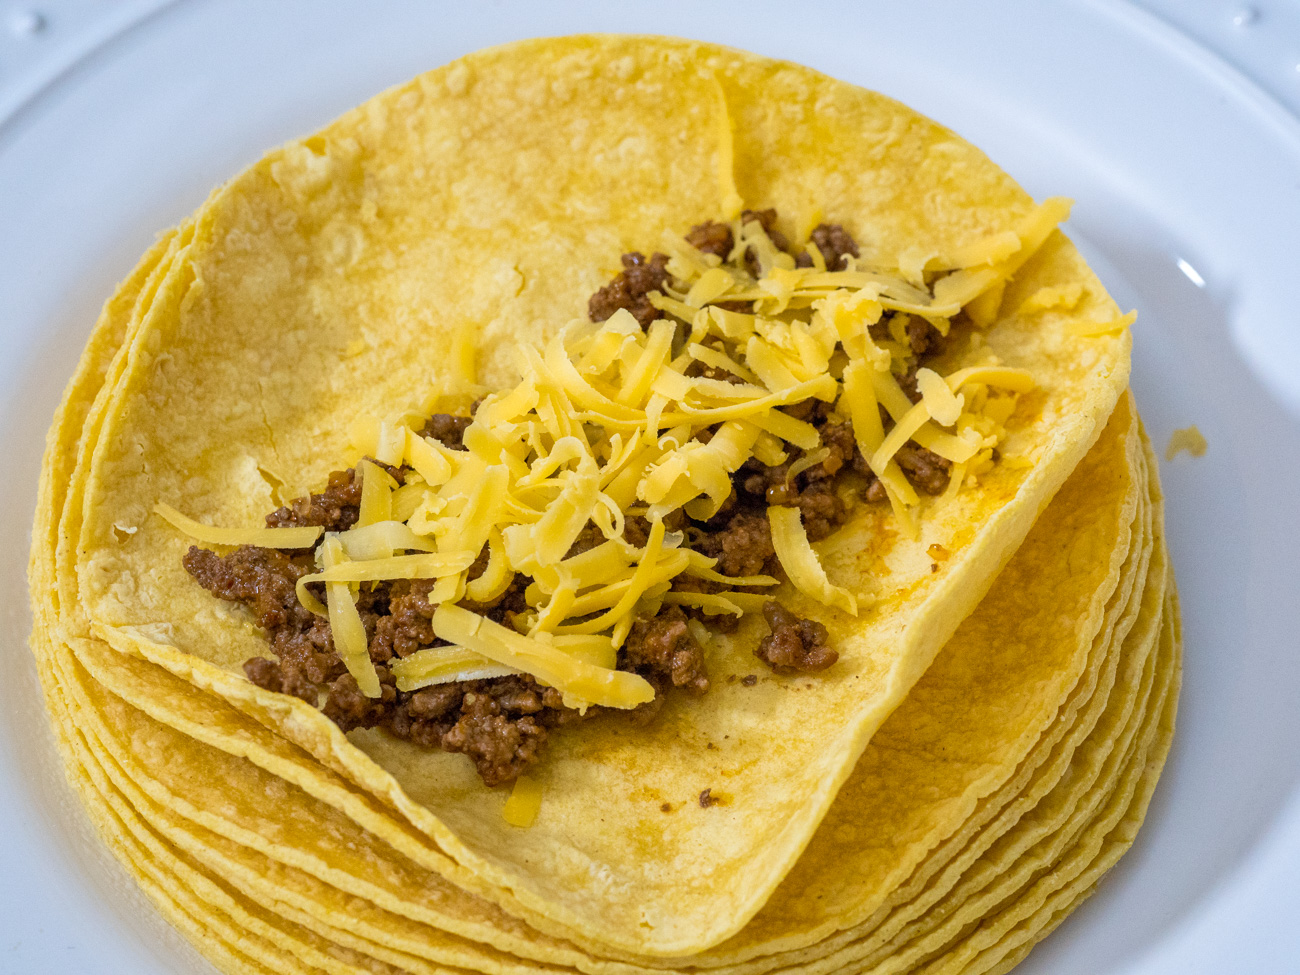 Place some of the ground beef and some of the cheddar in a straight line in the center of each tortilla and roll tightly.